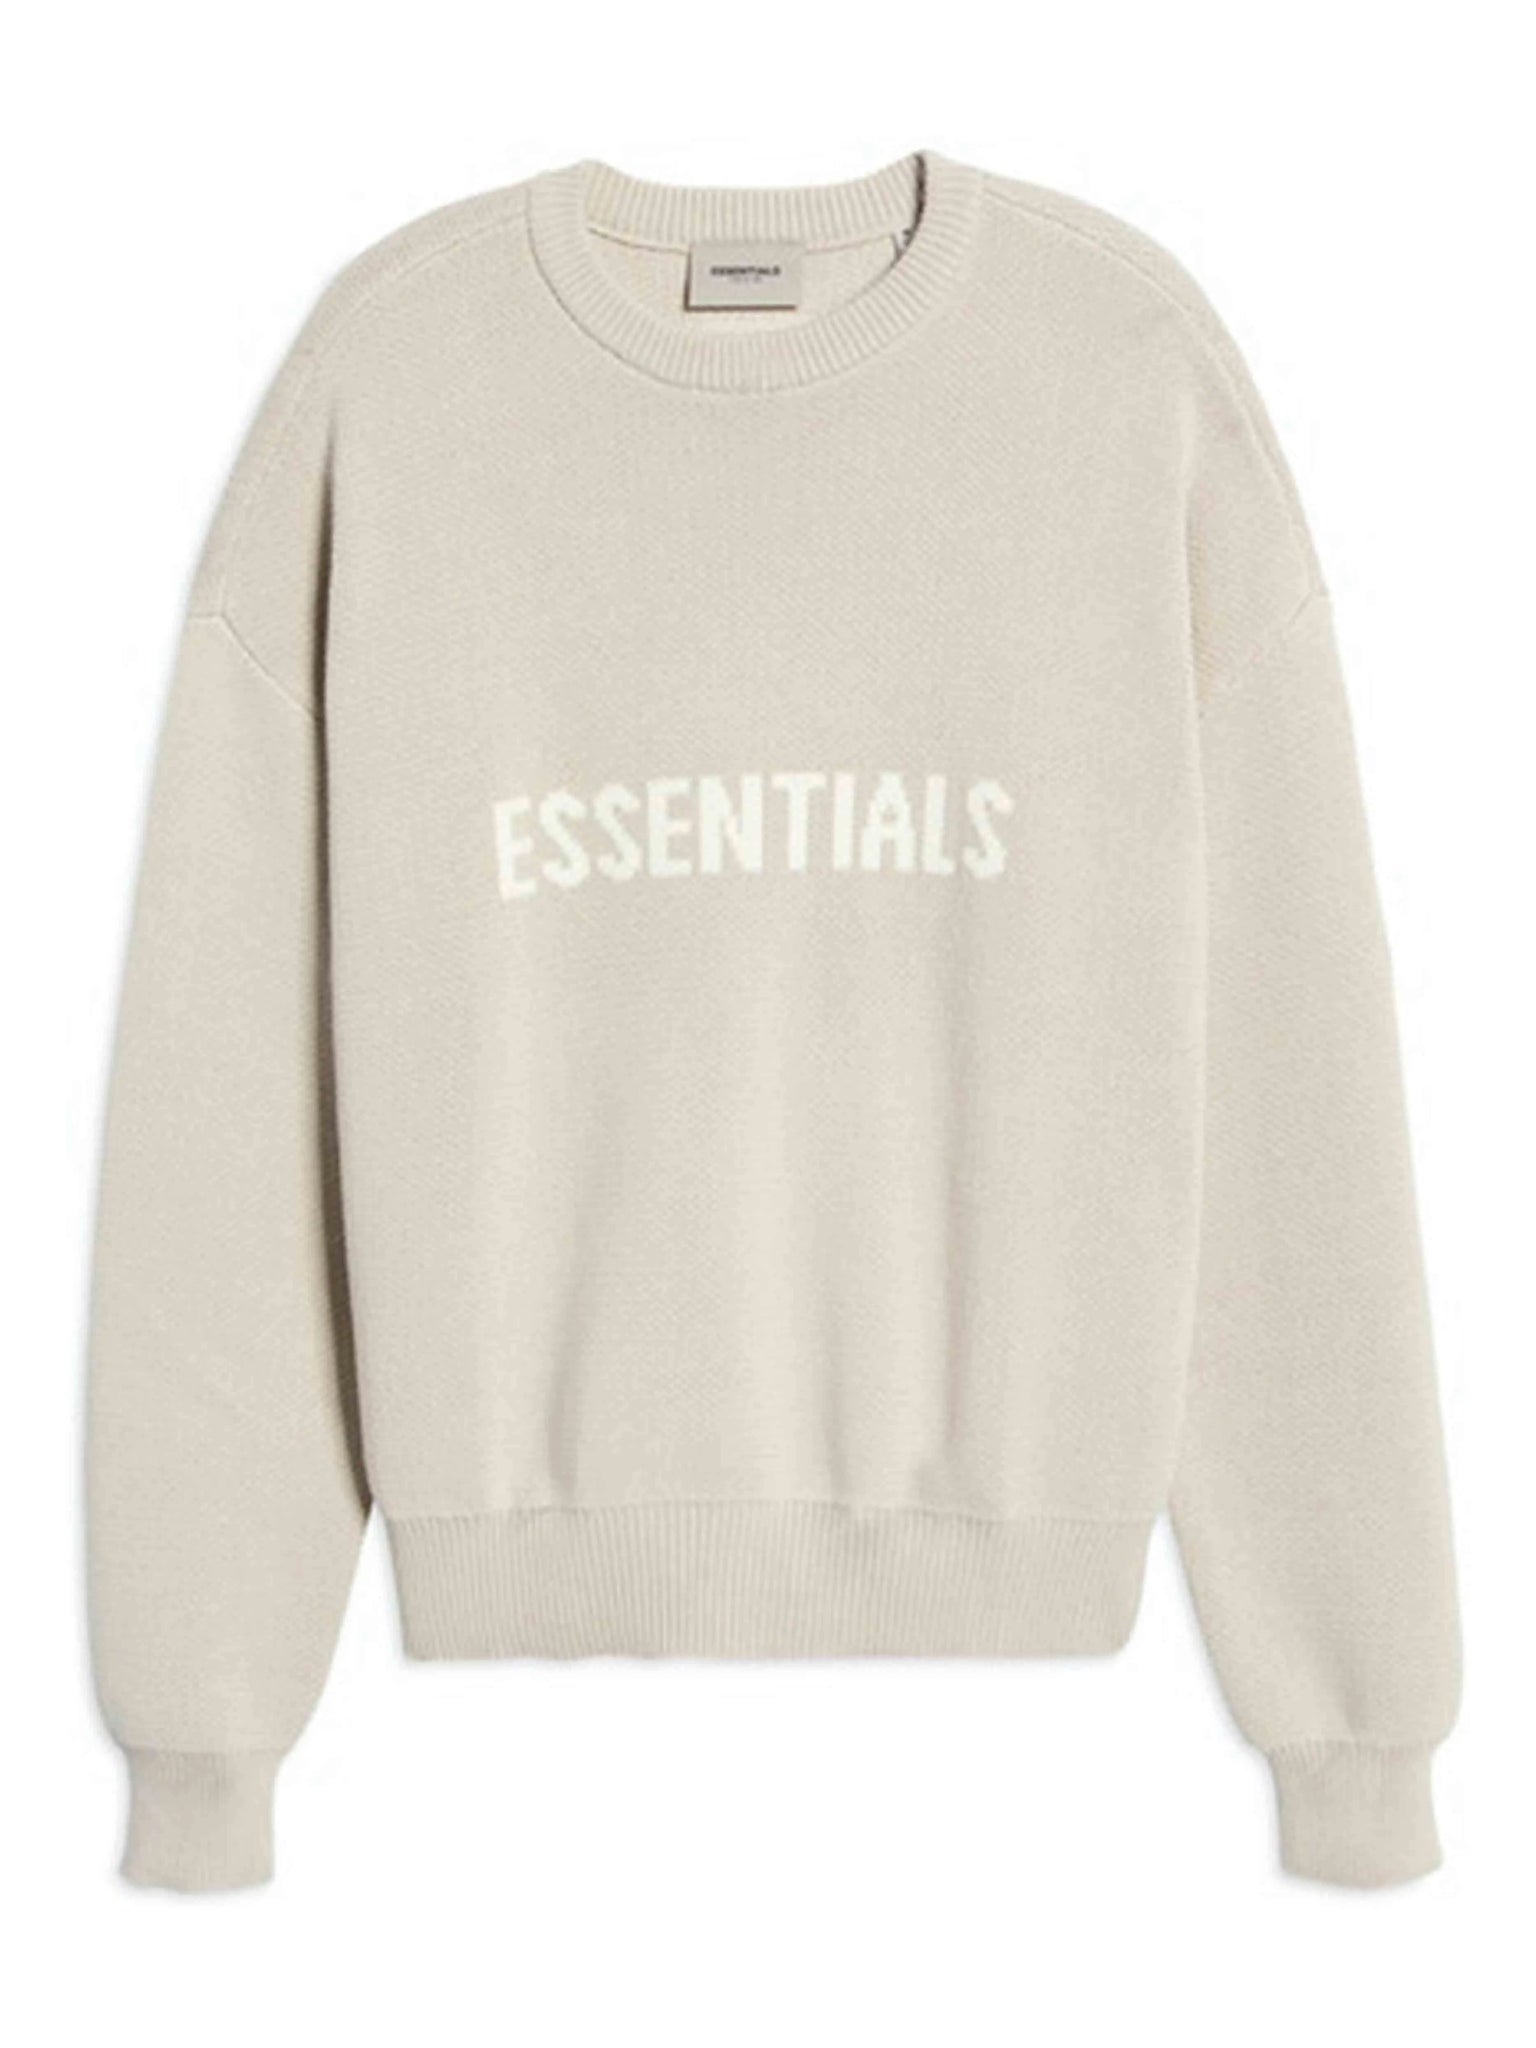 Fear Of God Essentials Knit Sweater Oat [SS21] Prior